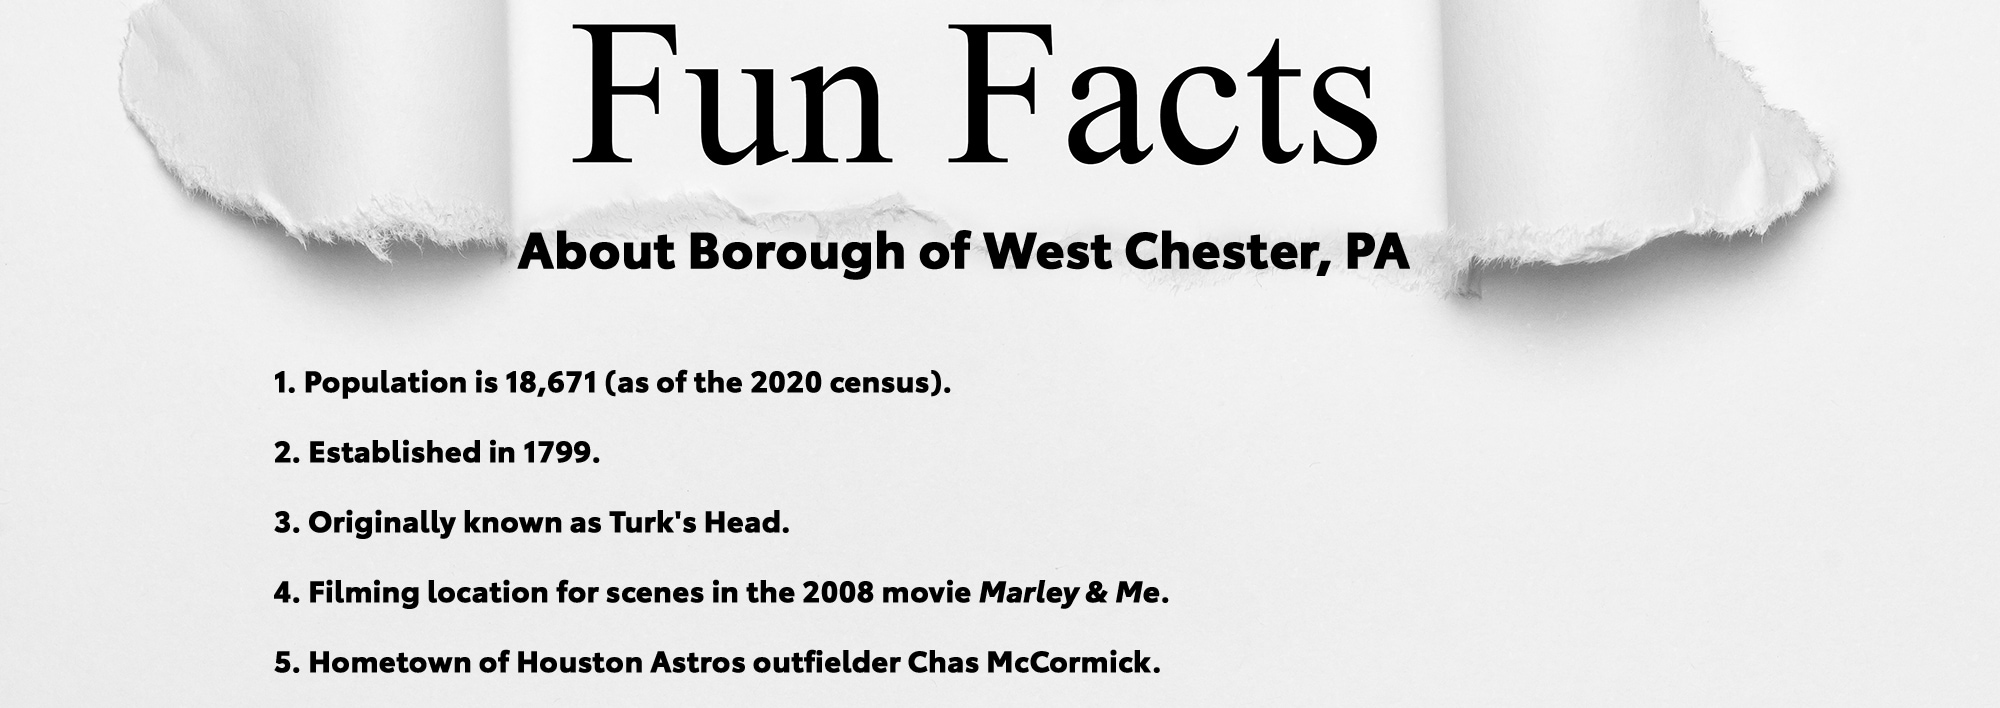 Five Fun Facts about Borough of West Chester, PA: Population is 18,671 (as of the 2020 census), Established in 1799, Originally known as Turk's Head, Filming location for scenes in the 2008 movie Marley & Me, and Hometown of Houston Astros outfielder Chas McCormick.